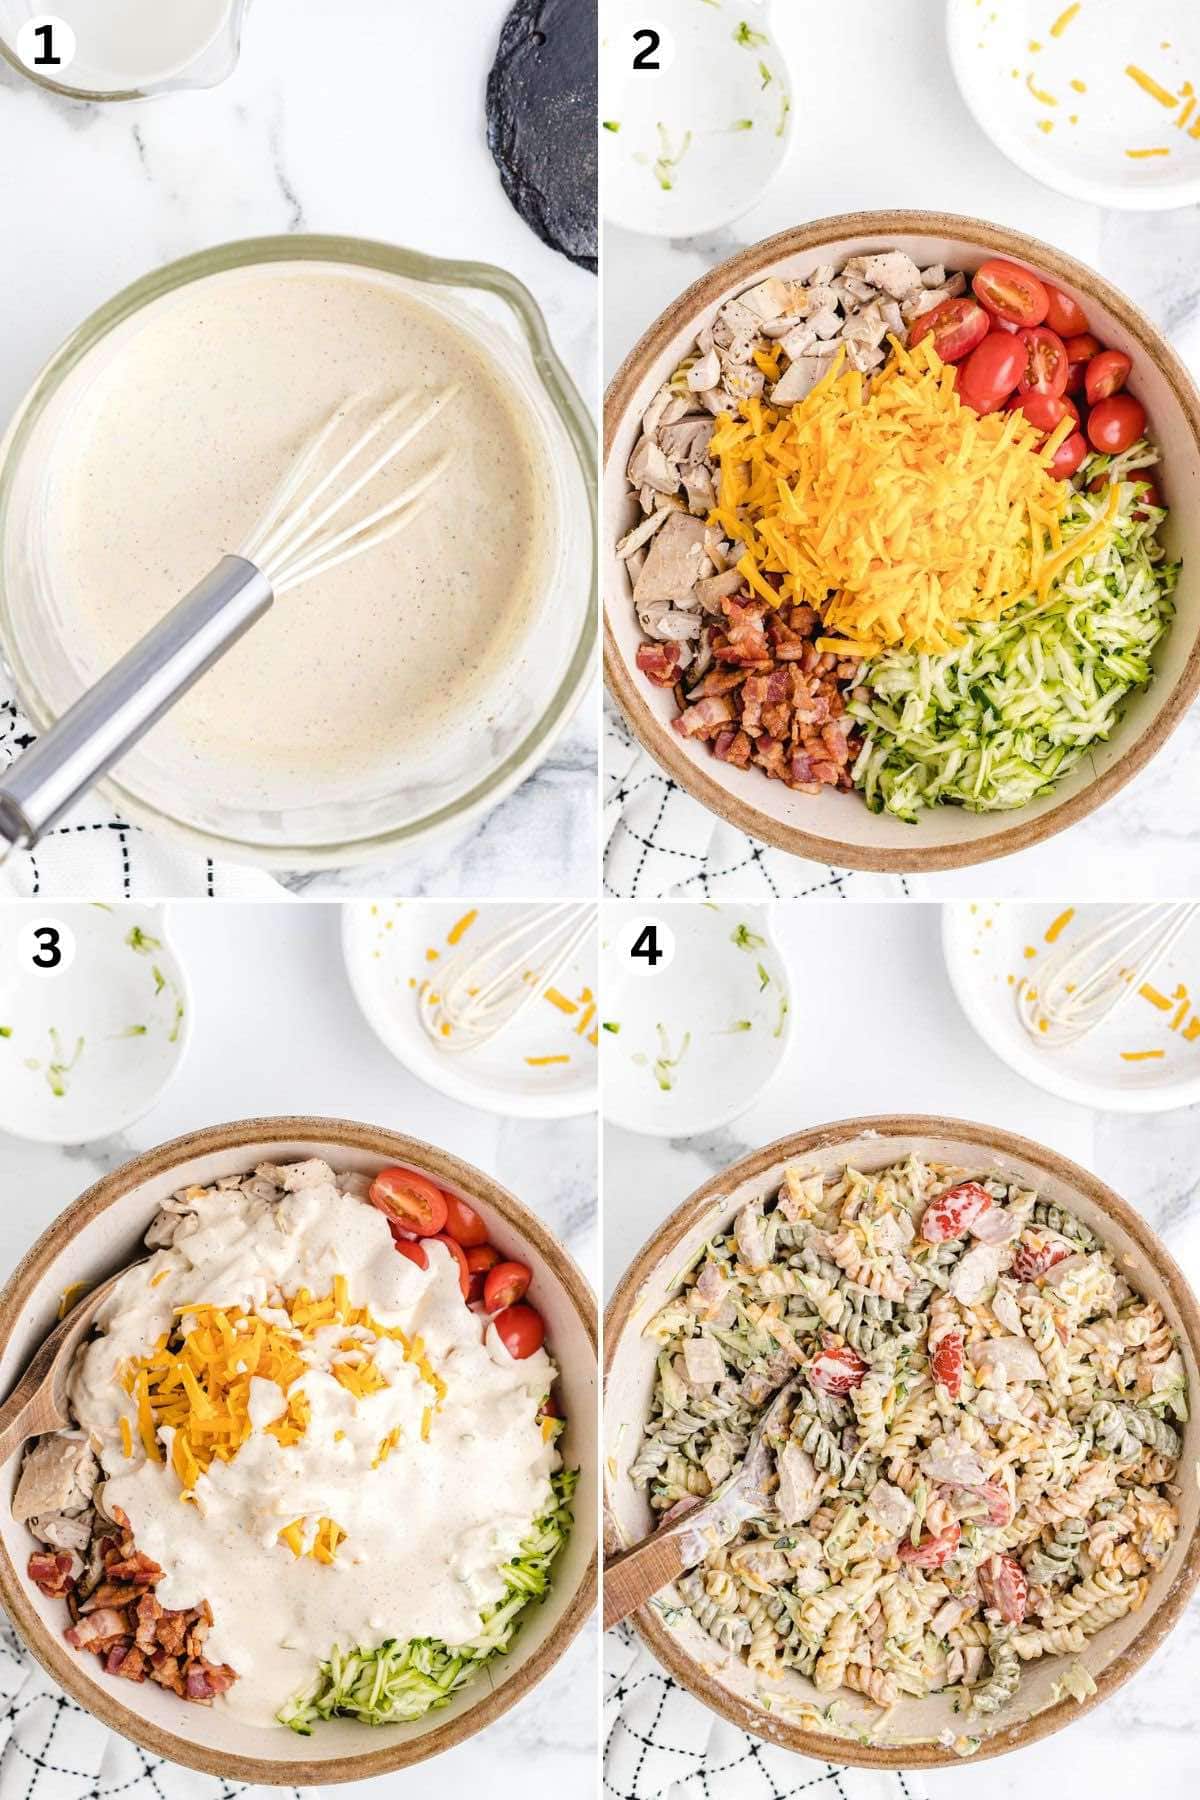 mix the ranch dressing. put all ingredients in a bowl. pour the dressing and mix to coat. 